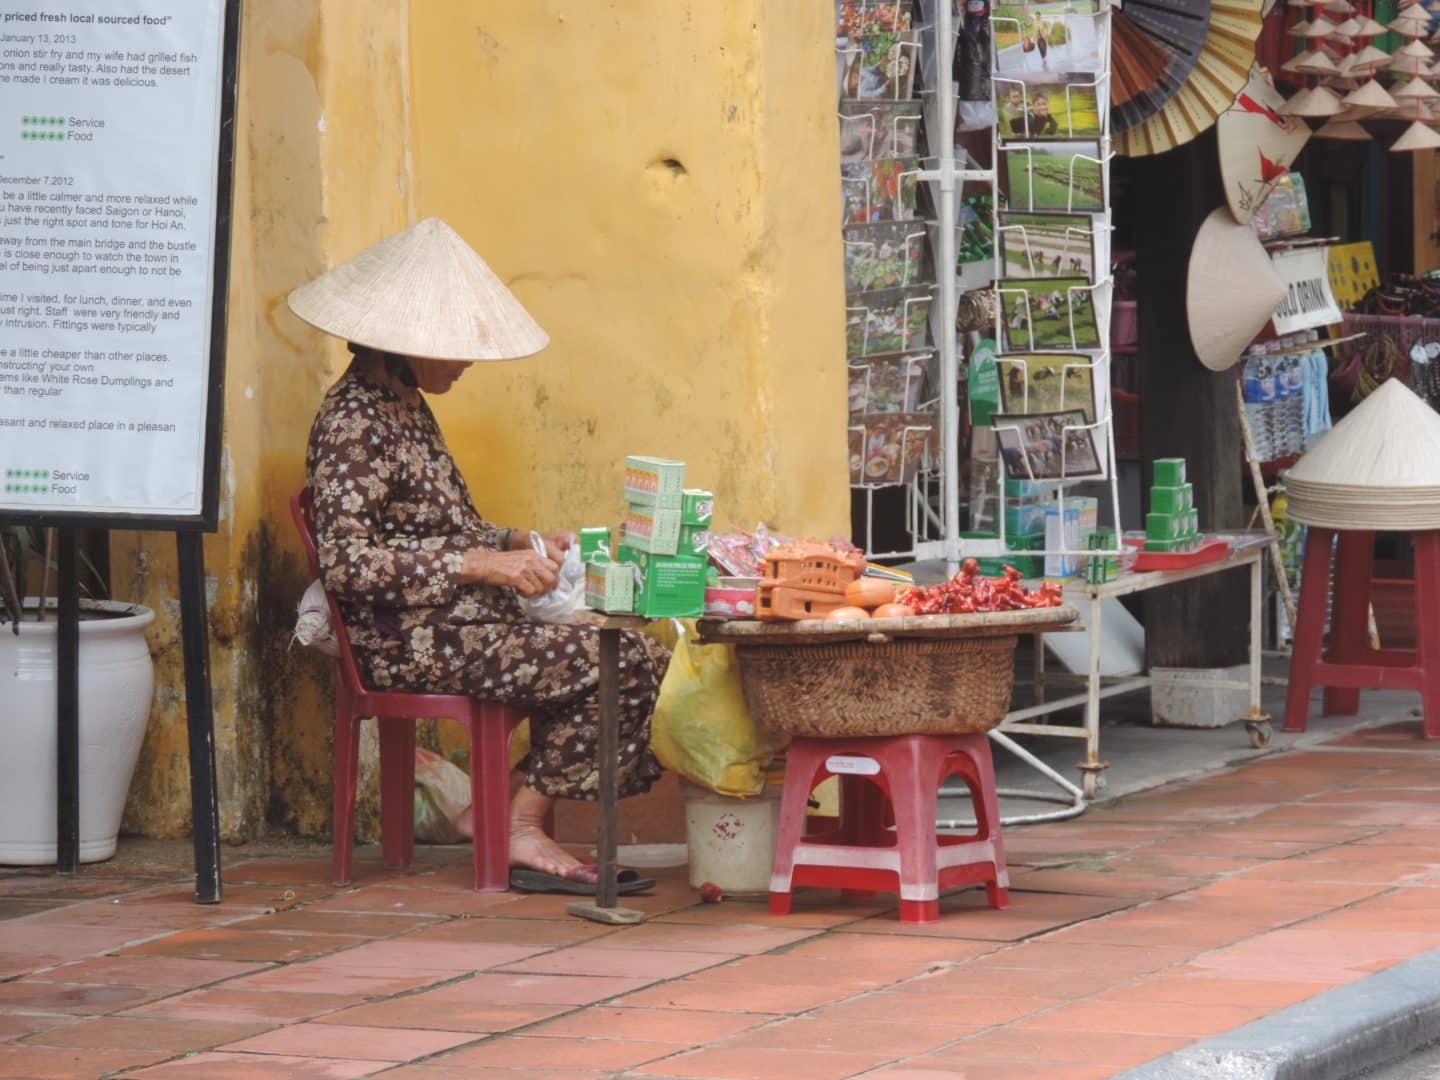 Market traders in Hoi An